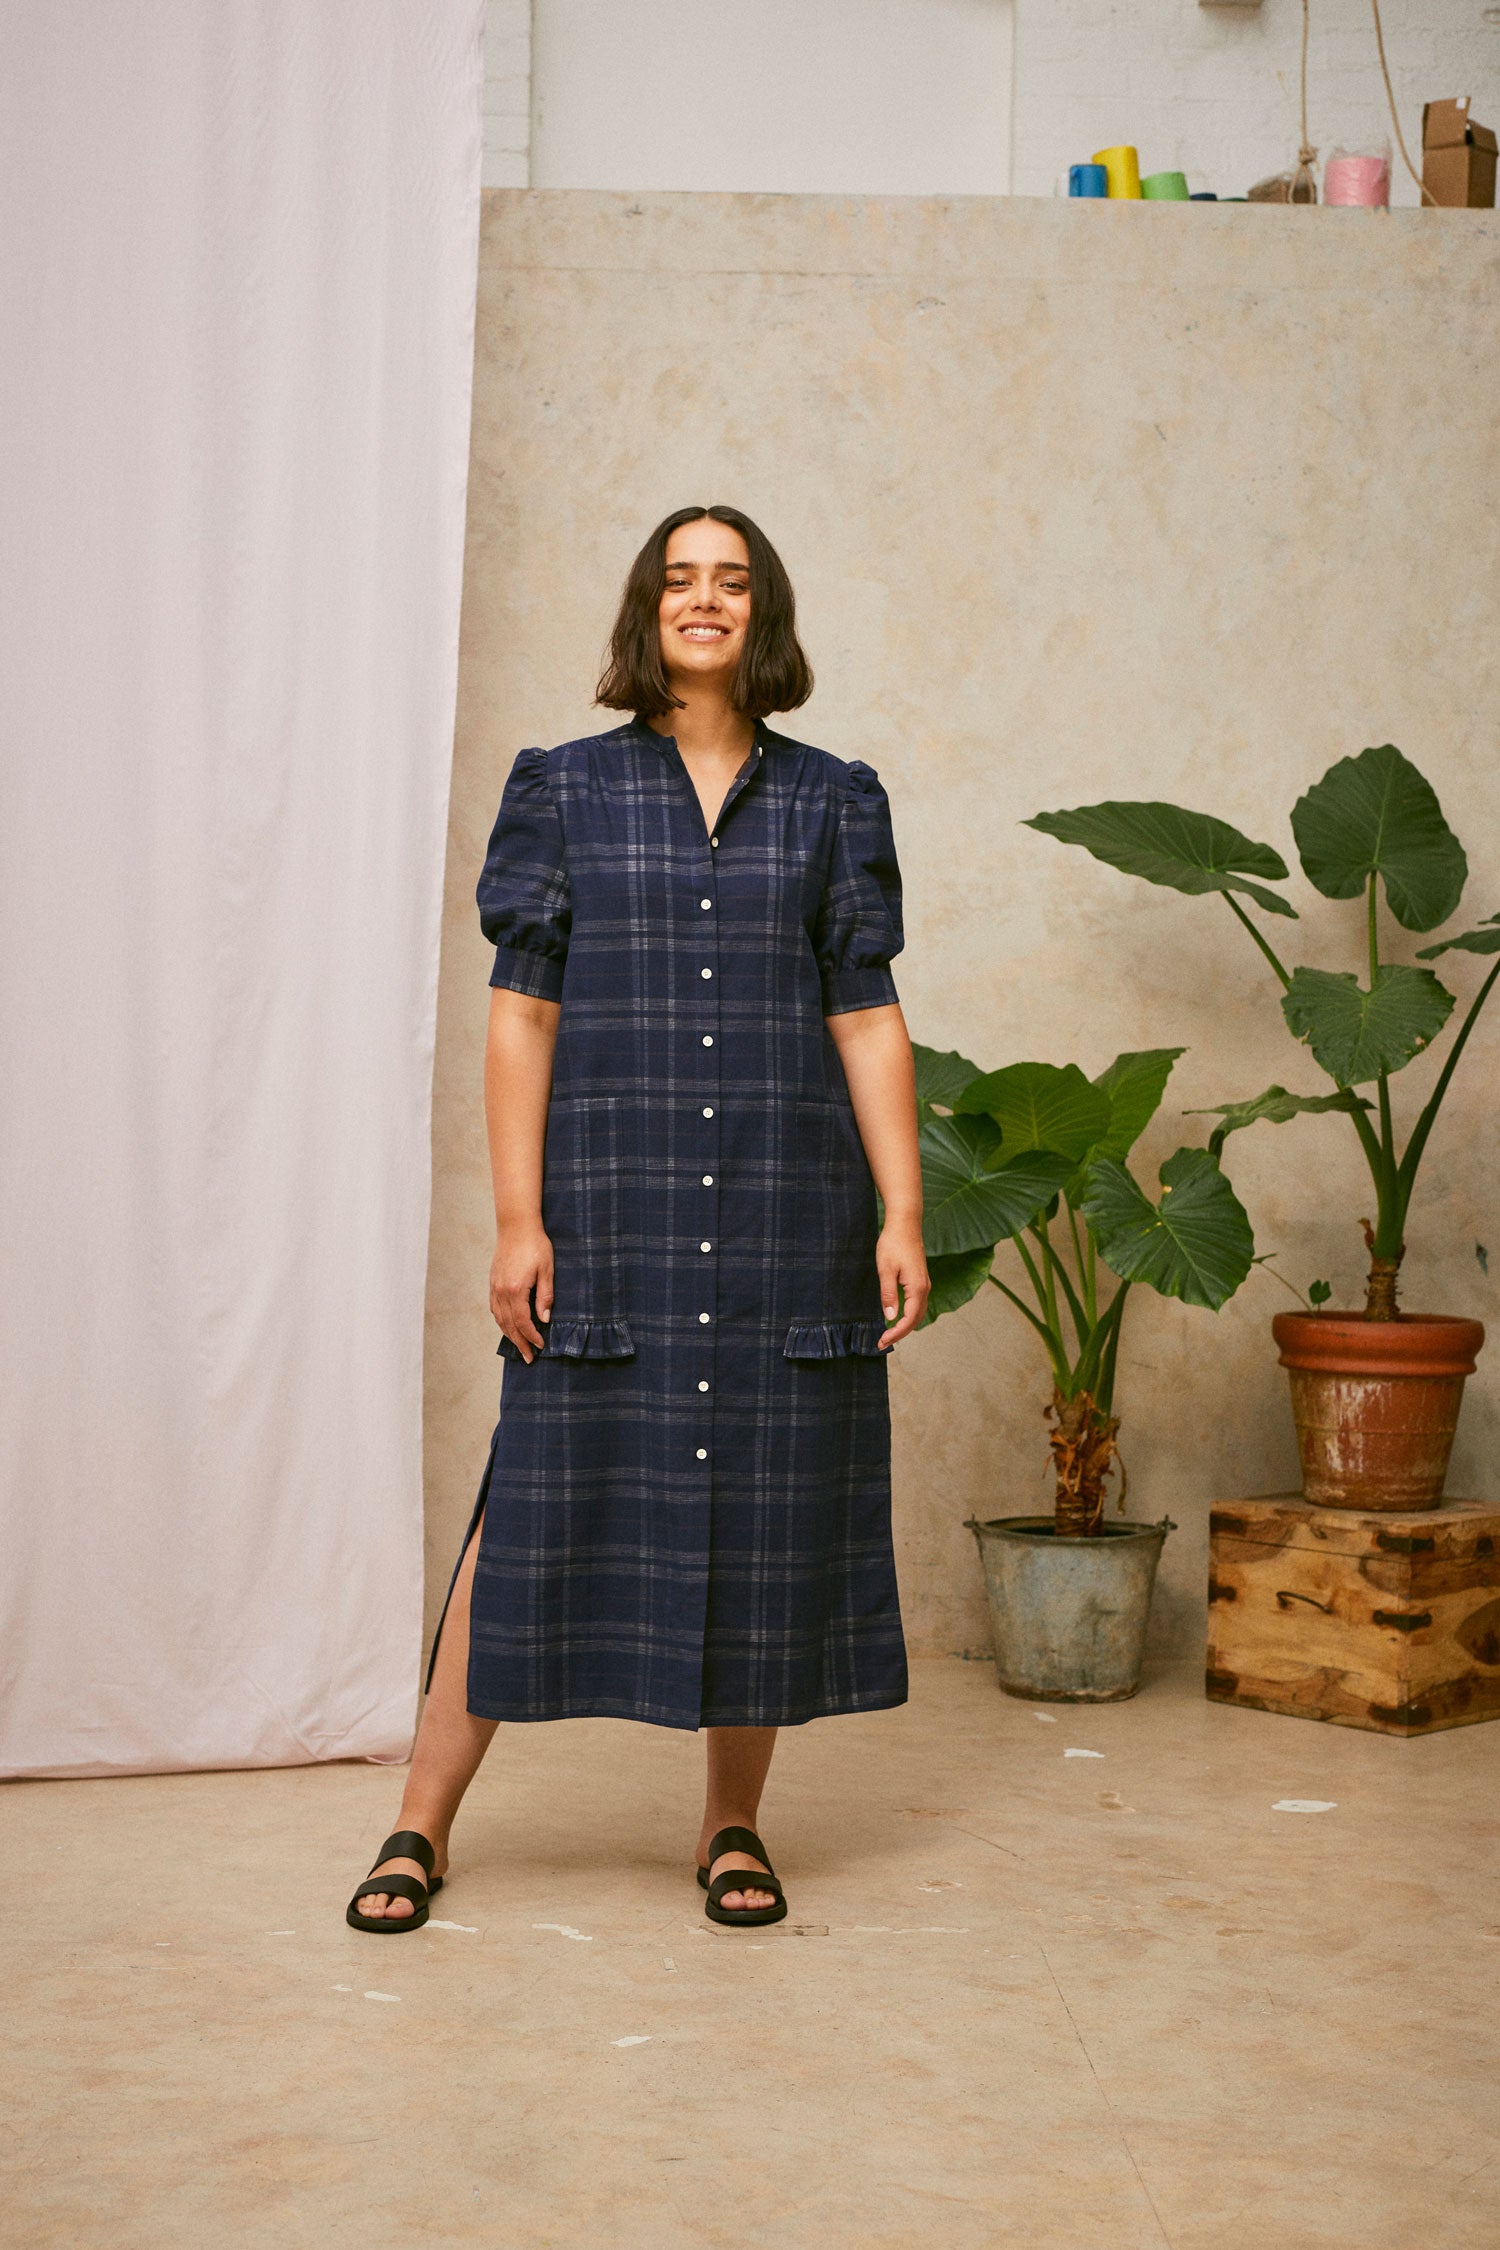 Full length shot of model wearing Saywood's Rosa navy check puff sleeve shirtdress, loosely worn without a belt. The model is smiling. Worn with black sandals. A plant and drop of pink fabric can be seen in the background.